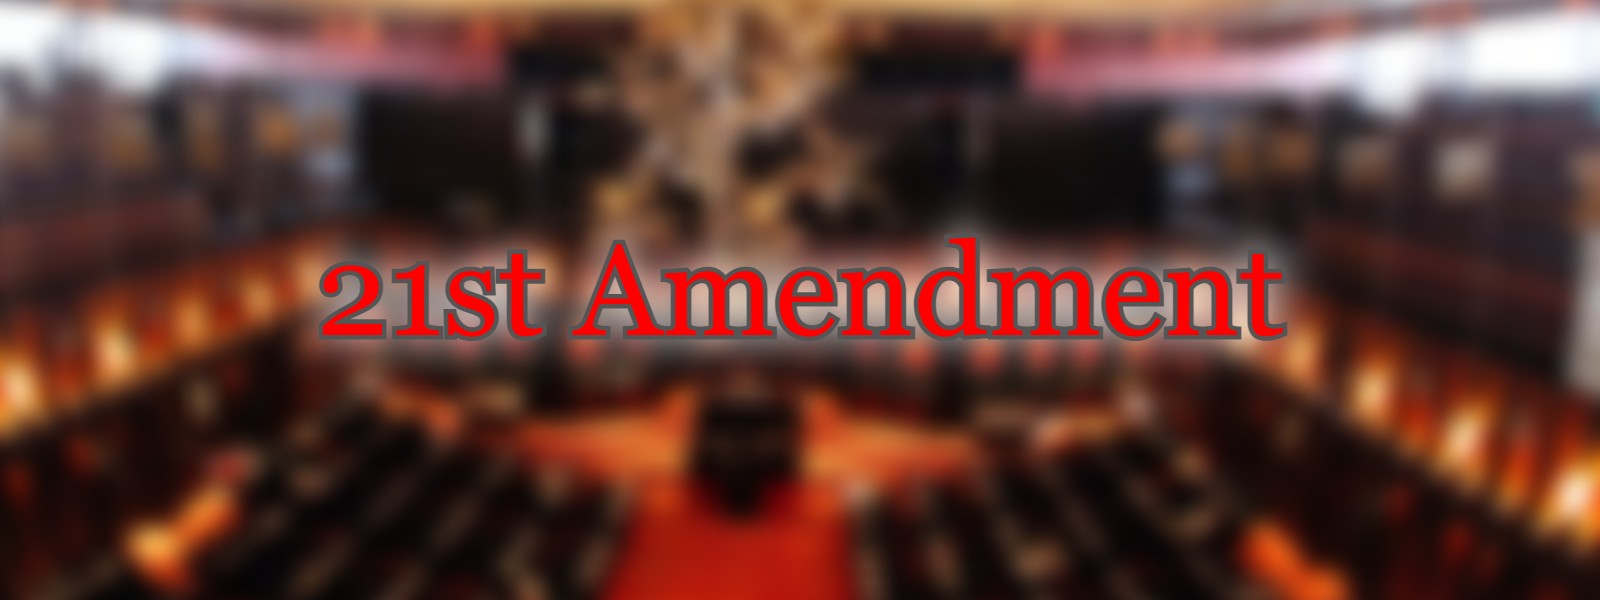 21st Amendment for Cabinet approval tomorrow (23)